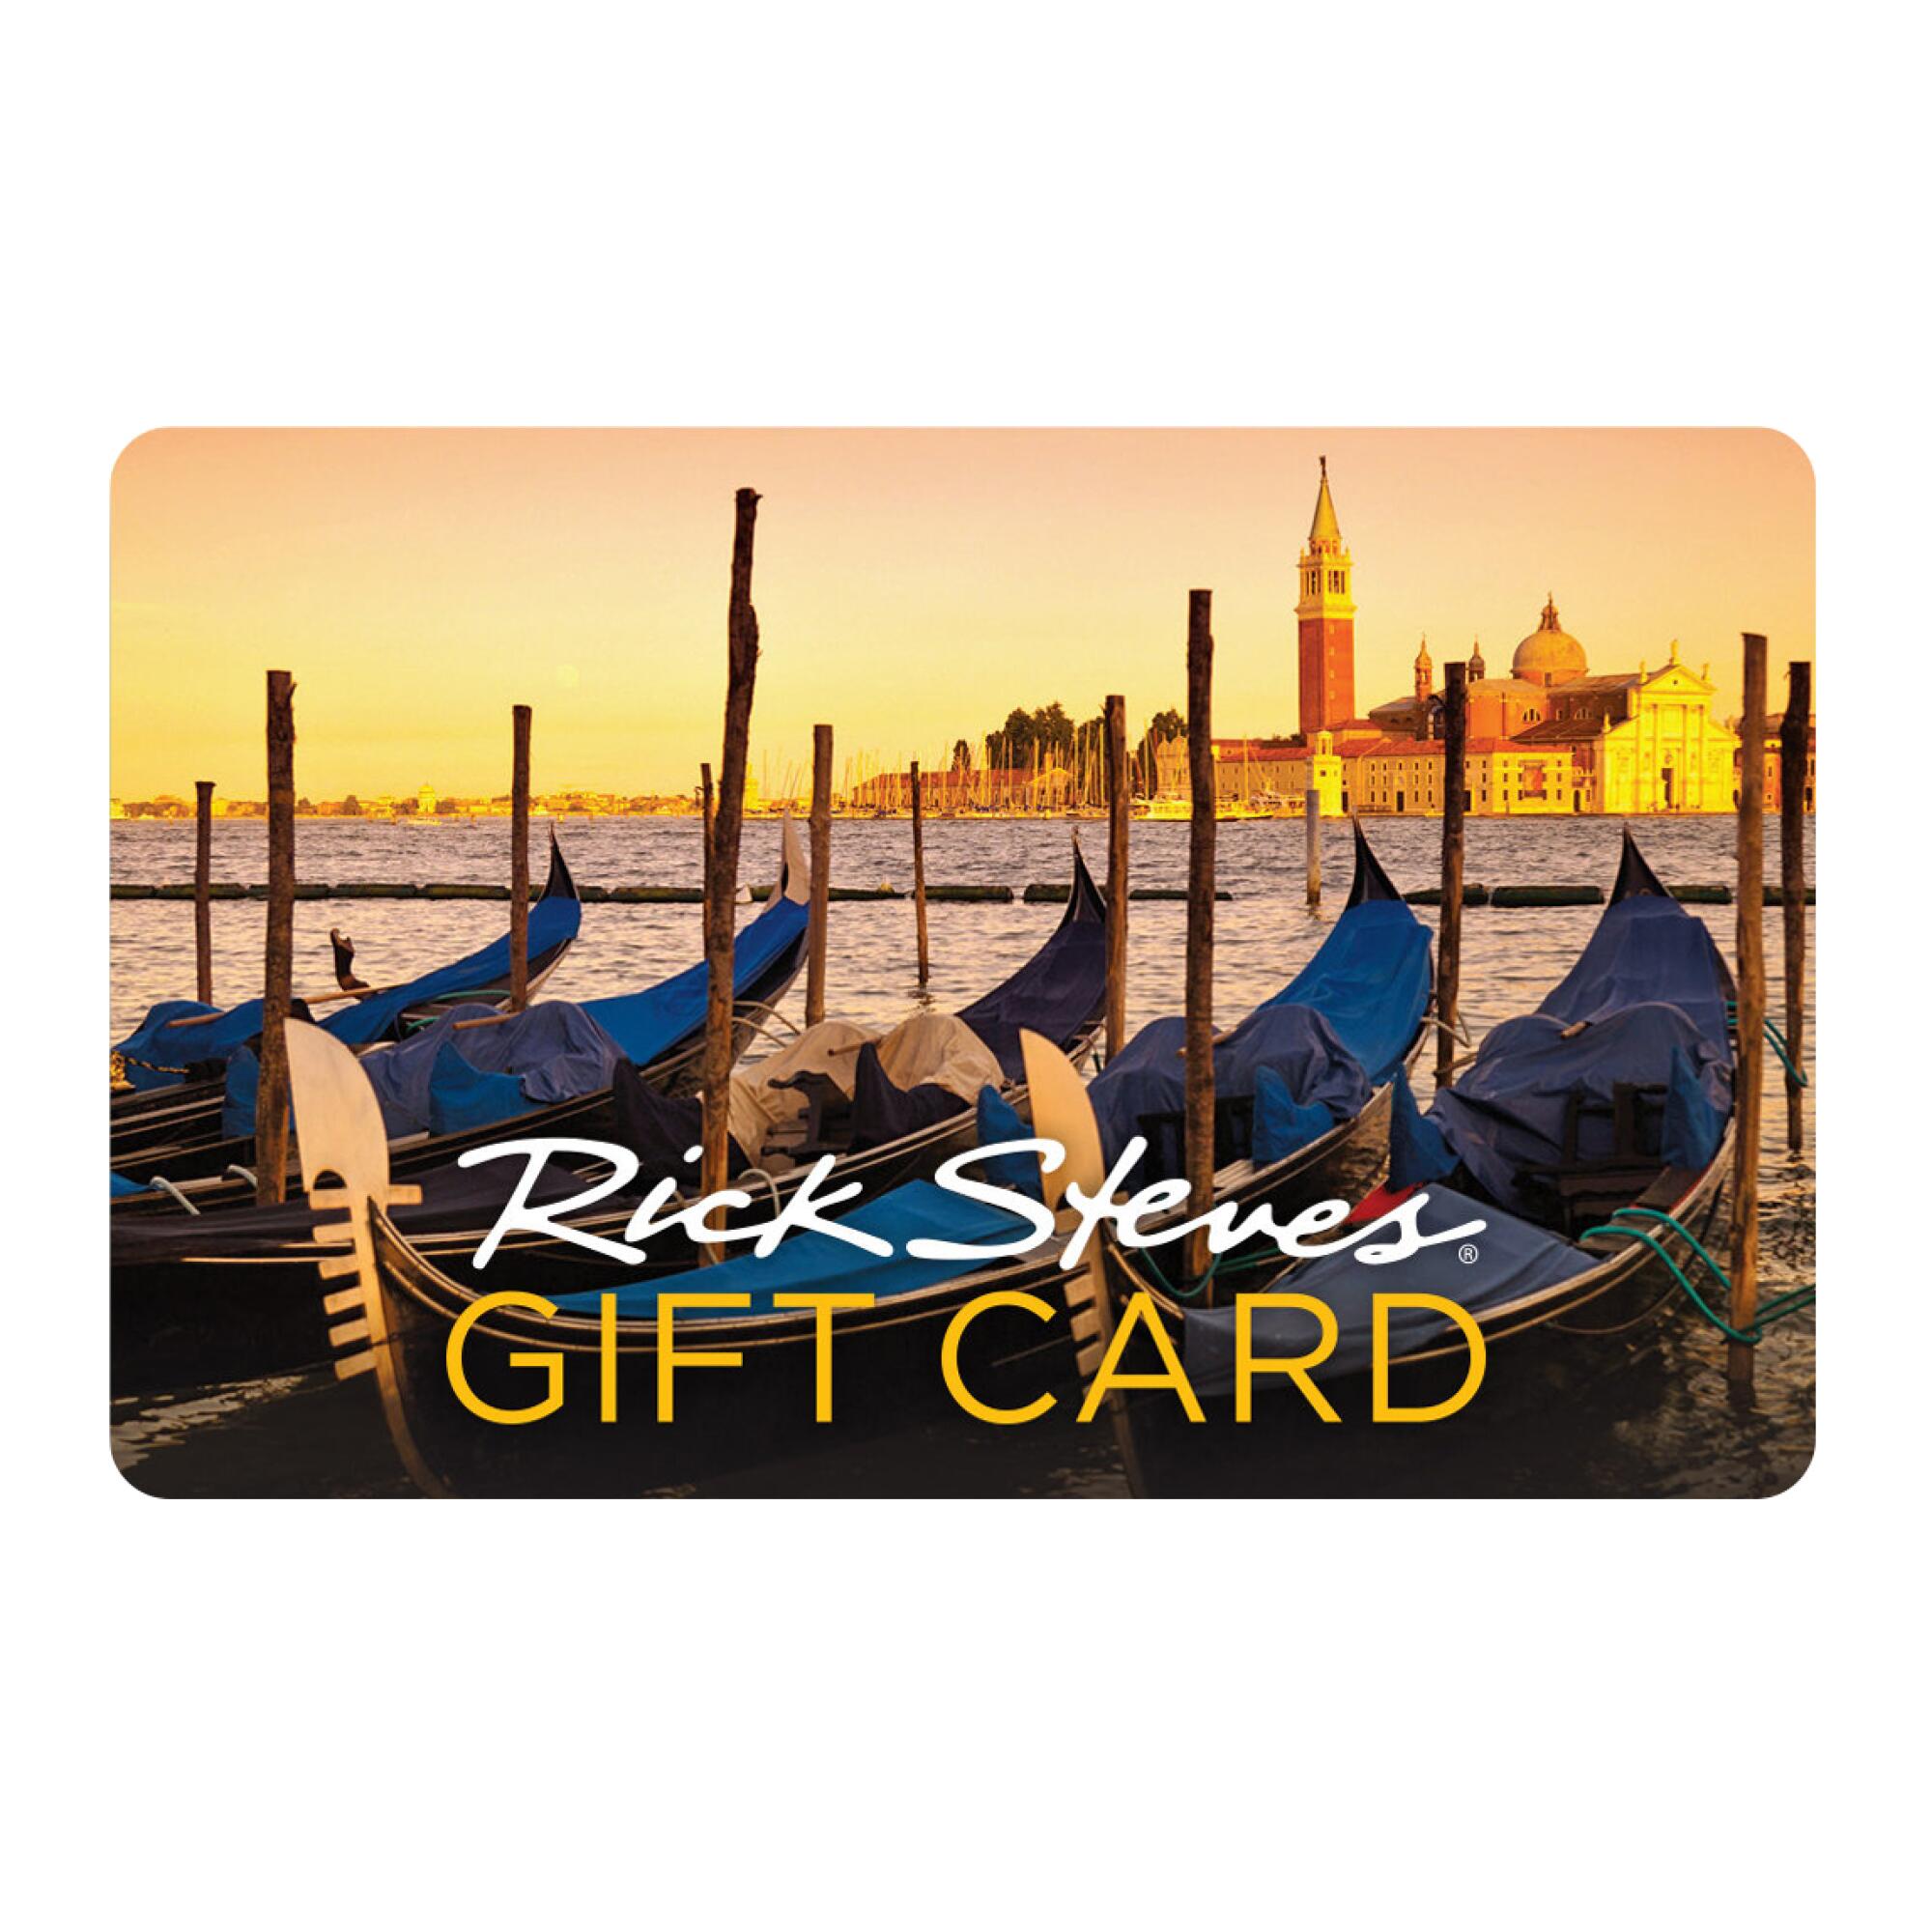 A gift card for Rick Steves' Europe